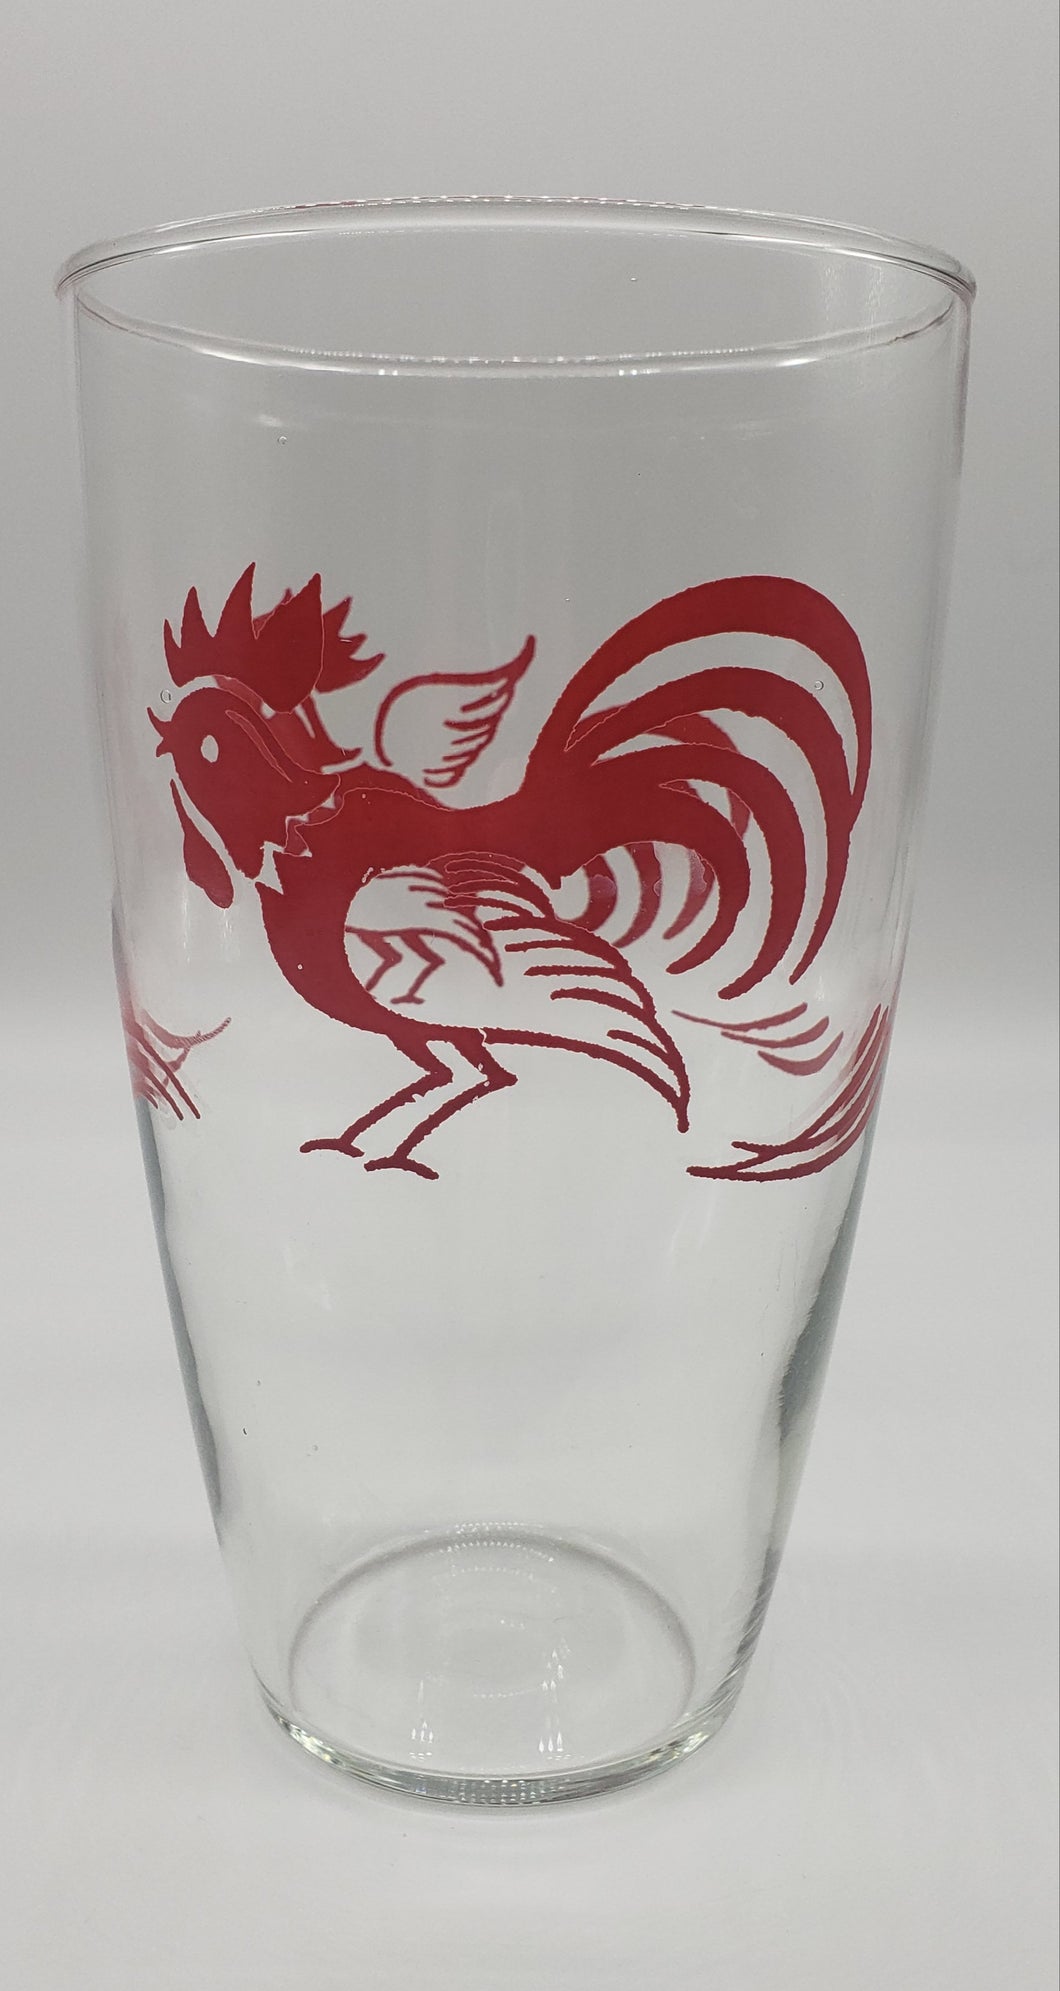 Libbey shaker glass  - Rooster, no lid